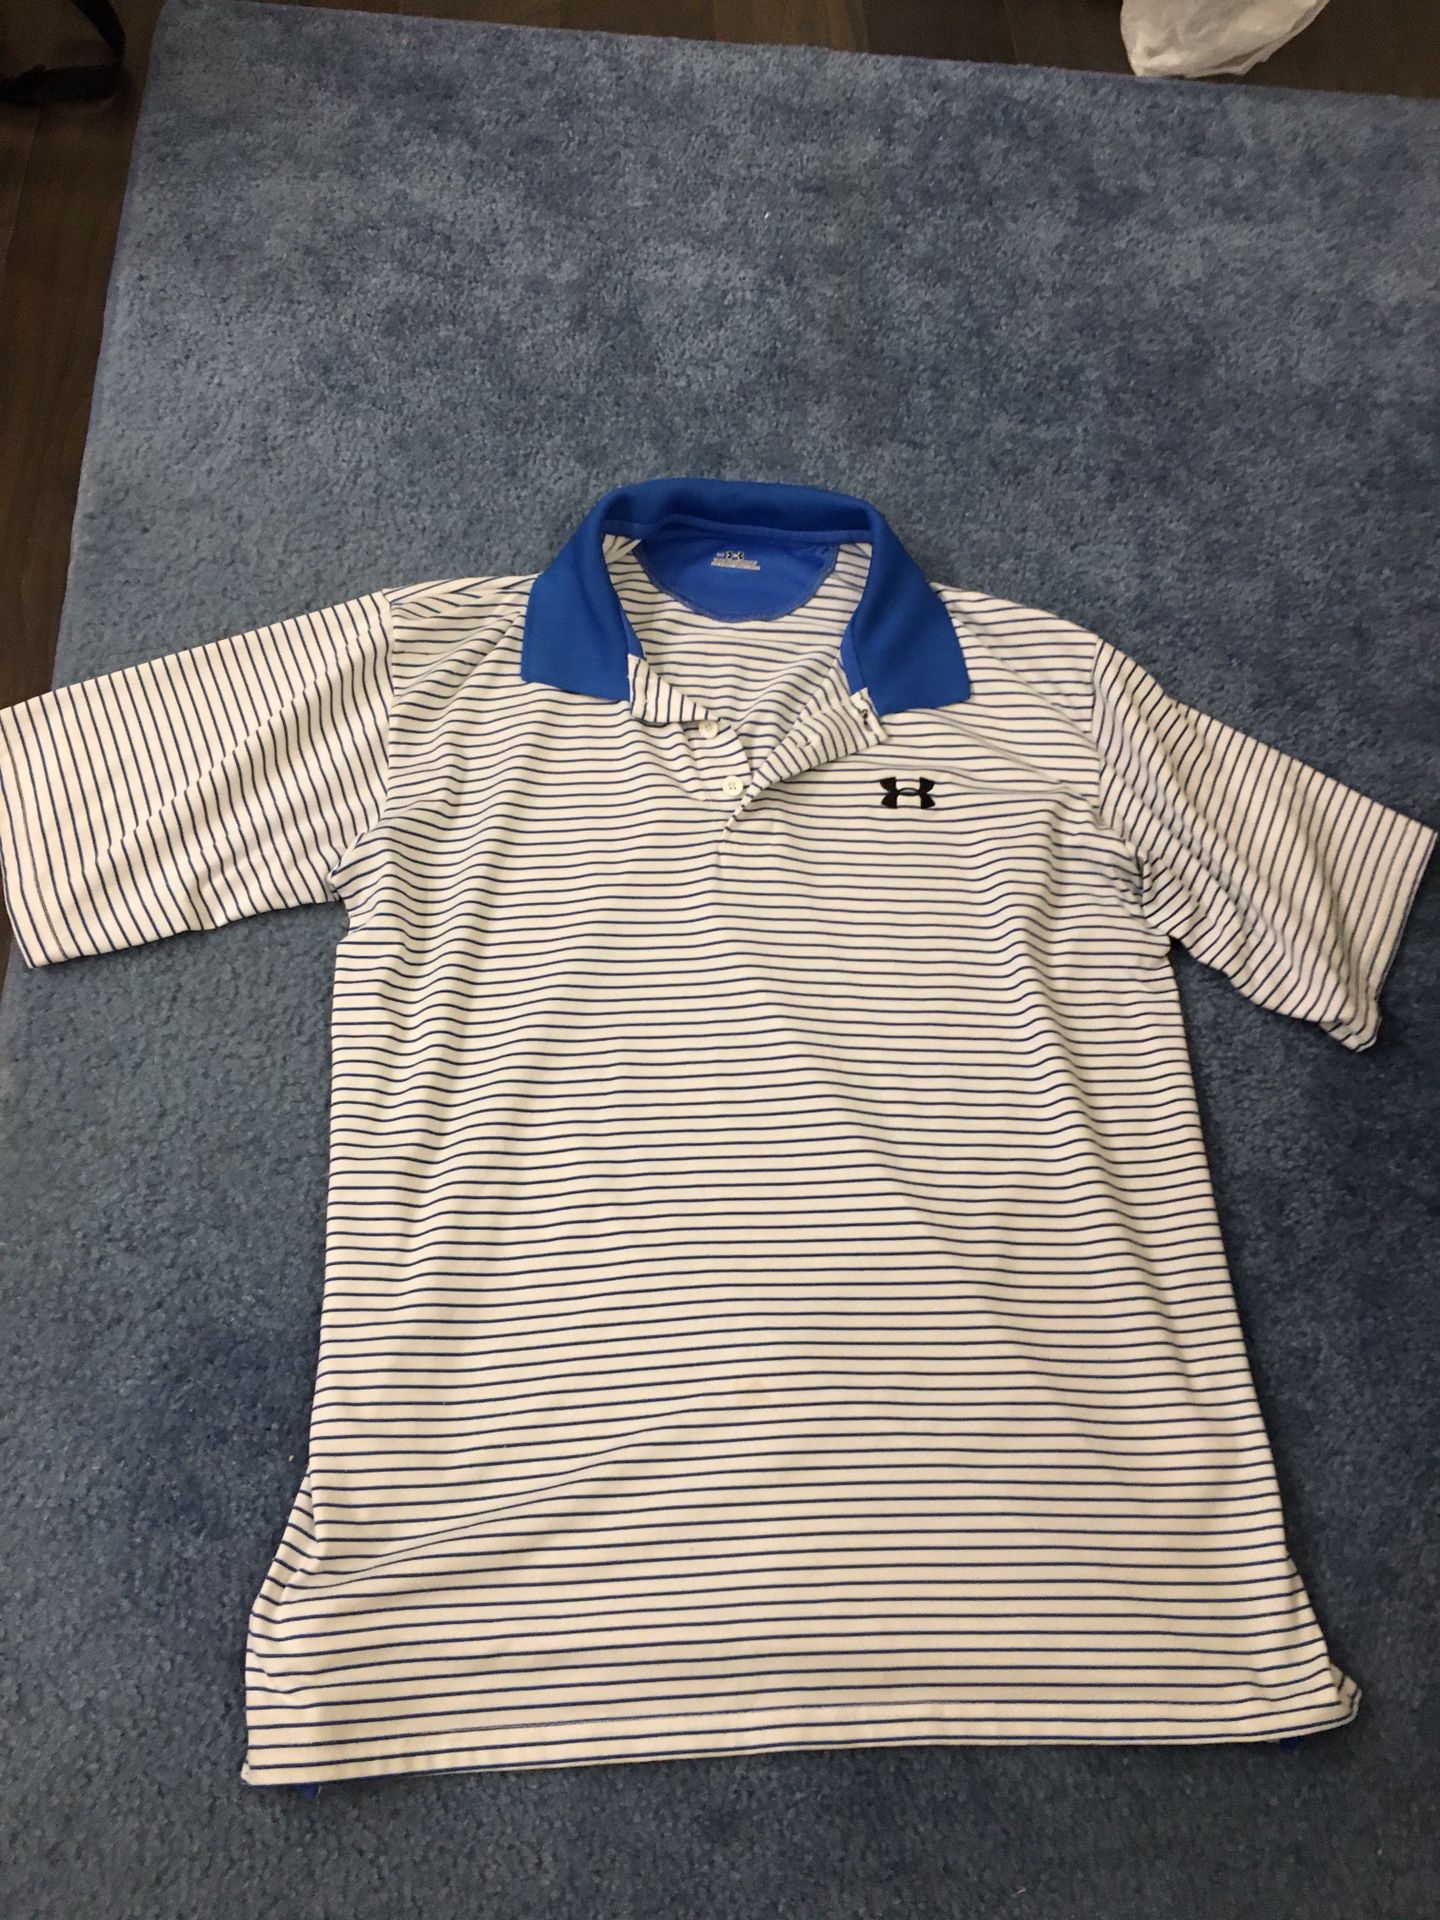 Men’s used xl under armour shirt